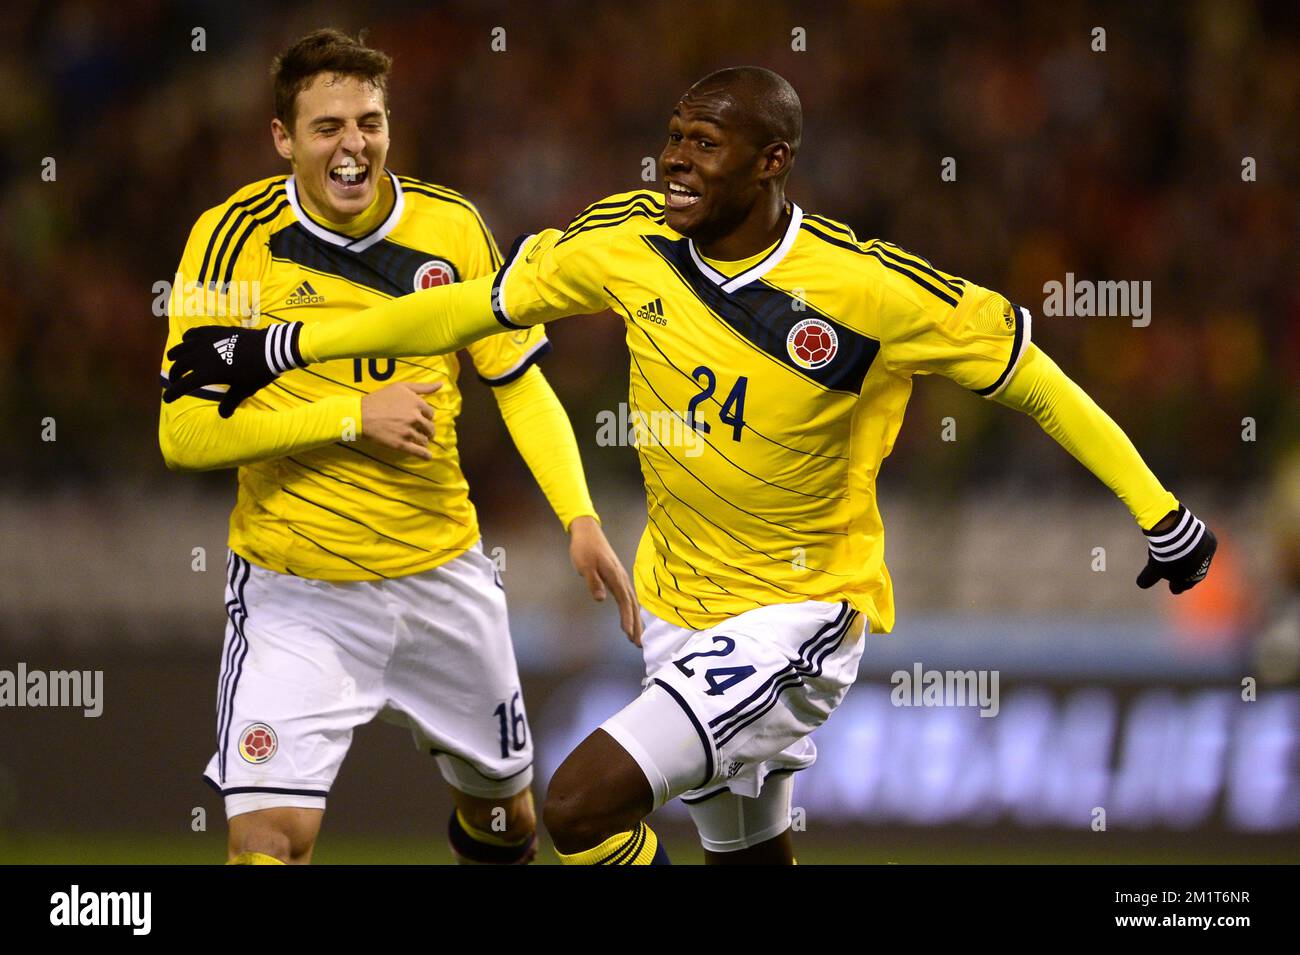 Colombia's Victor Ibarbo celebrates after scoring the 0-2 goal during a friendly soccer game between the Belgian national soccer team Red Devils and Colombia, at the Koning Boudewijn Stadion - Stade Roi Baudouin in Brussels, on Thursday 14 November 2013. BELGA PHOTO YORICK JANSENS Stock Photo